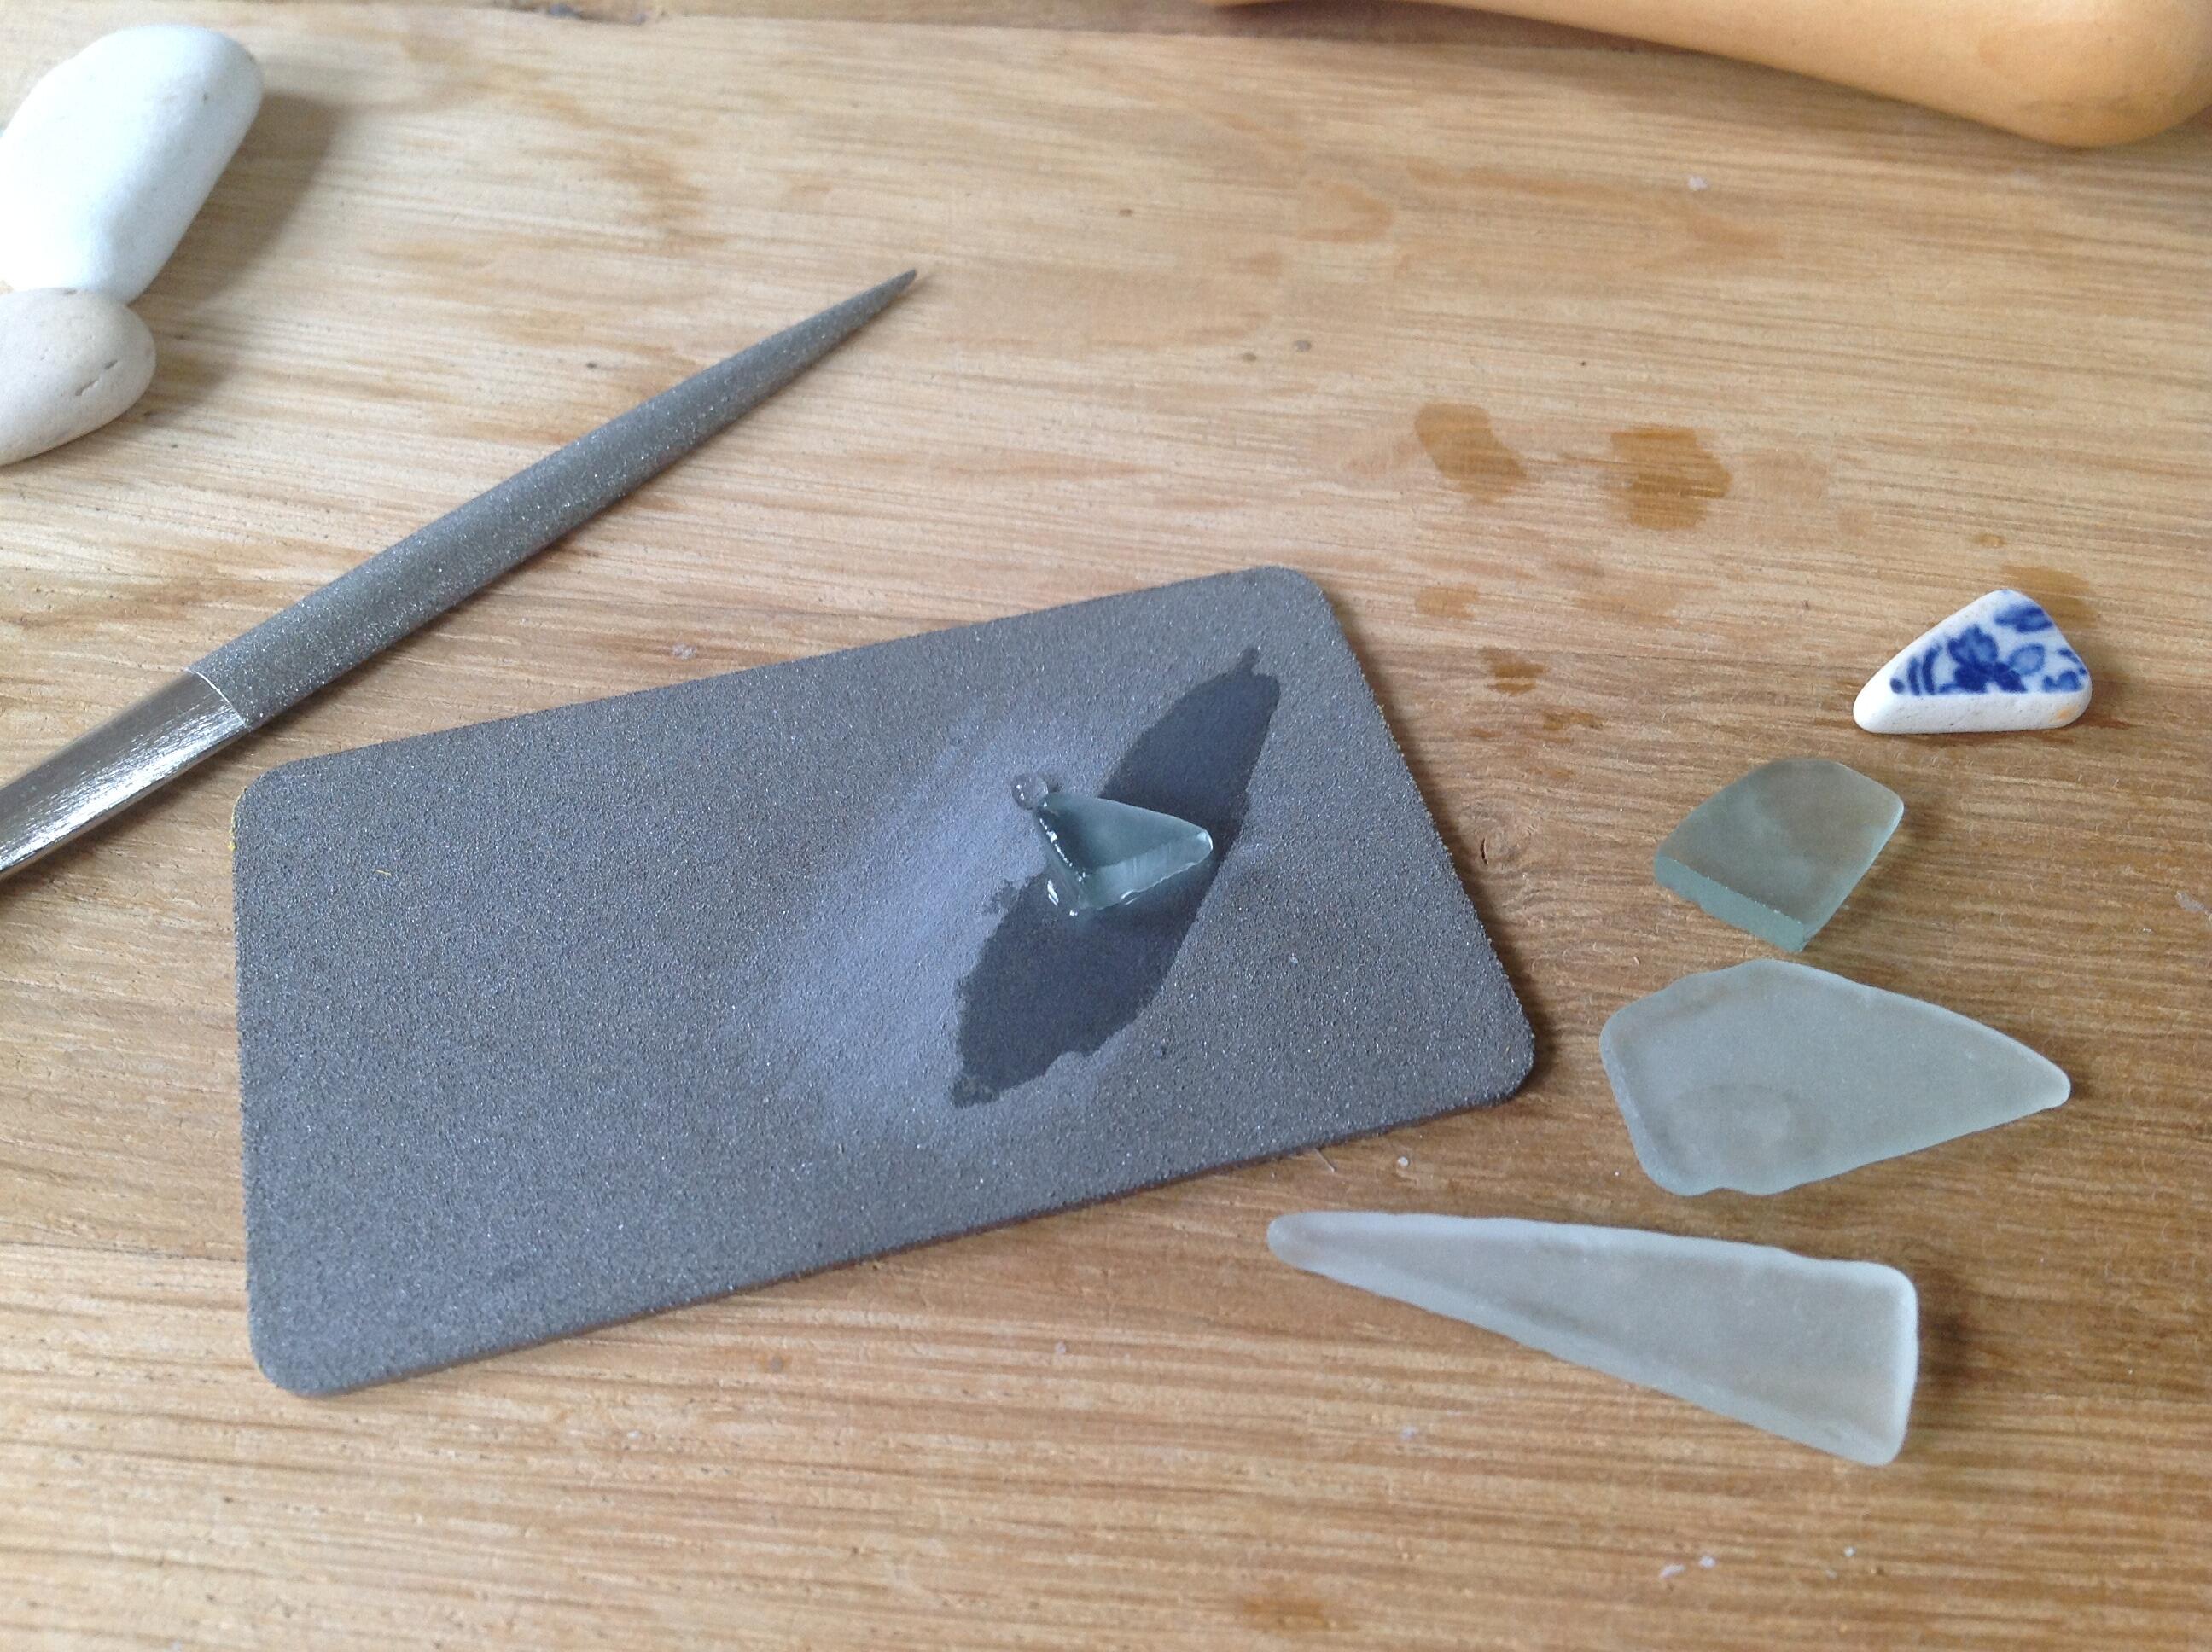 Ezelap diamond stone smoothing cabochons and sea glass pieces